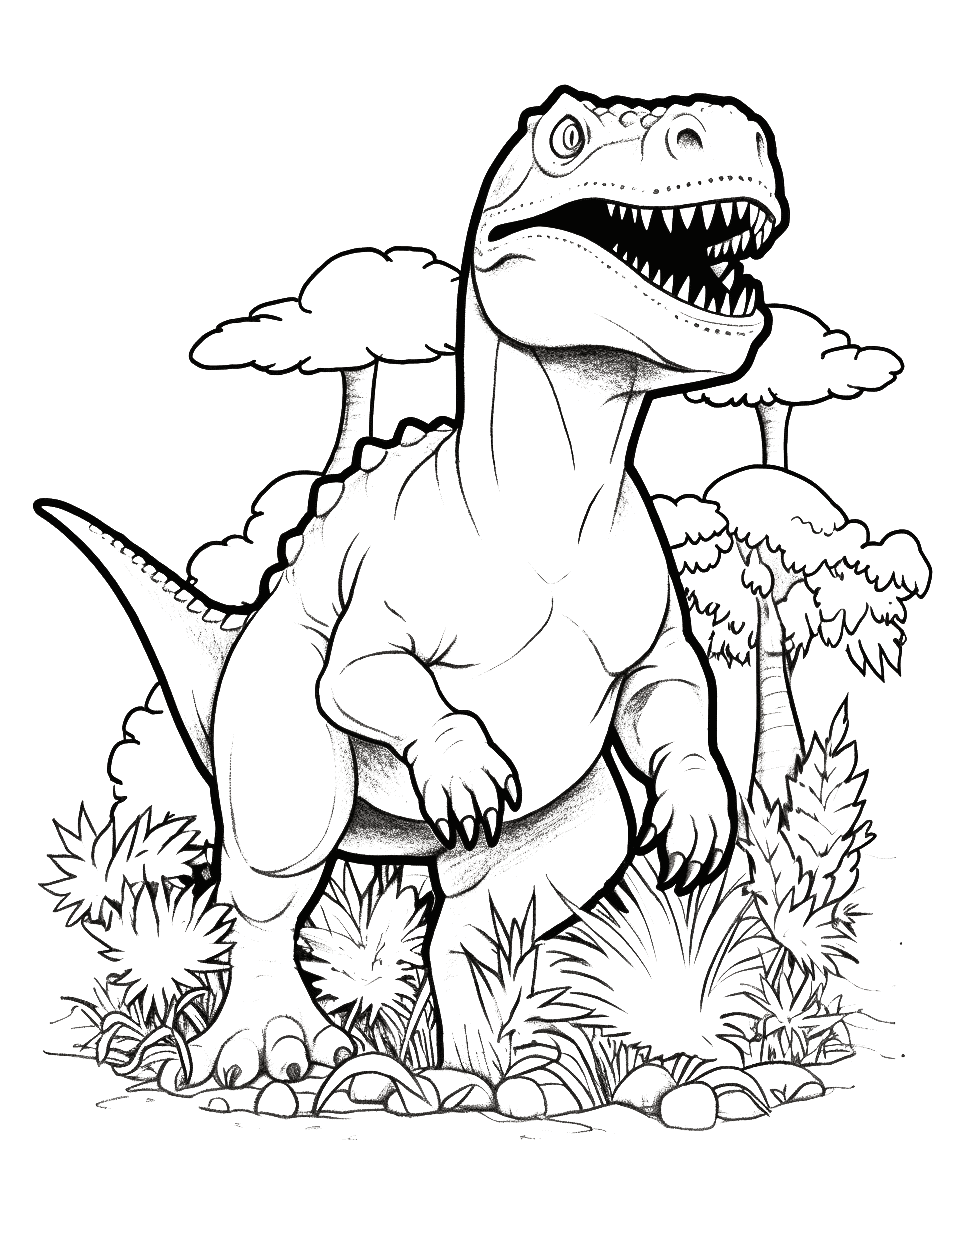 T-Rex Chase Coloring Page - A T-Rex chasing smaller dinosaurs through the jungle.